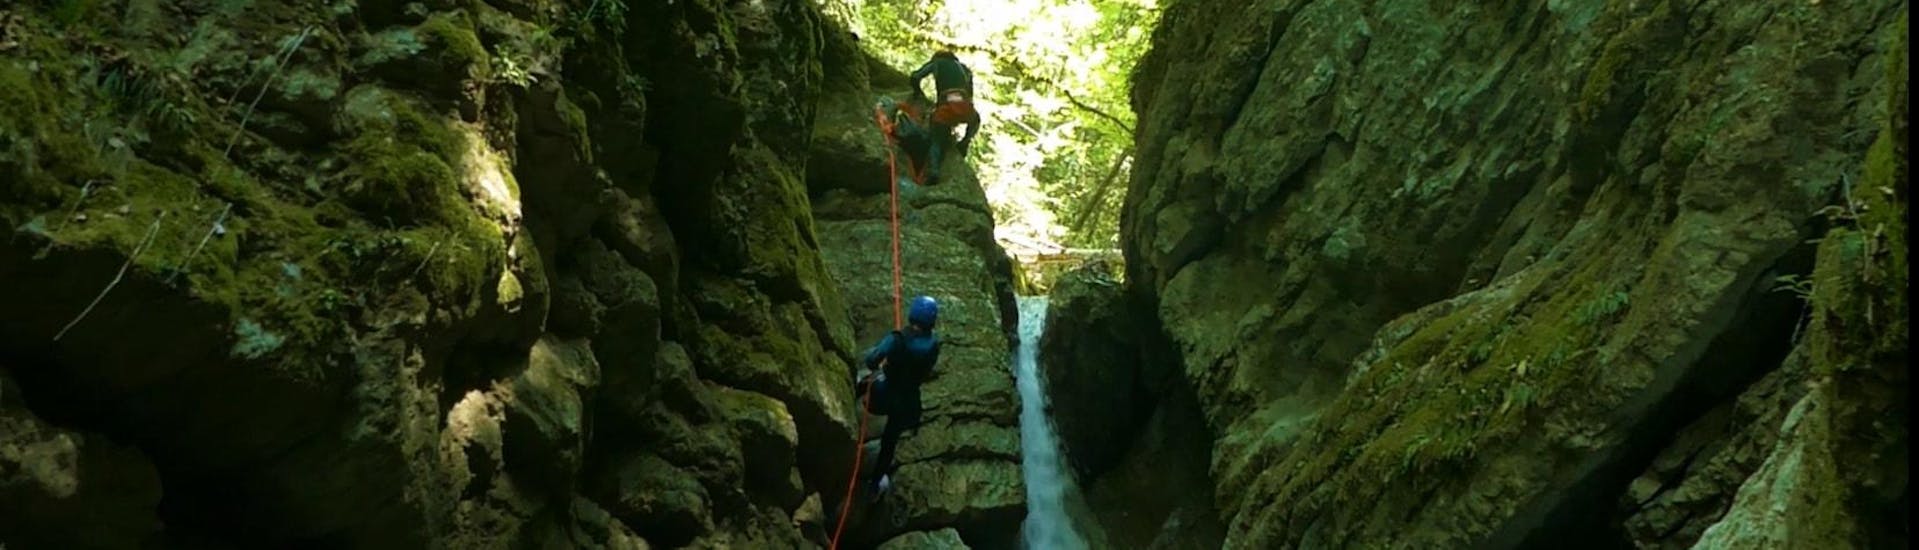 Canyoning nahe Annecy in Canyon d'Angon, Talloires - Mailbox.